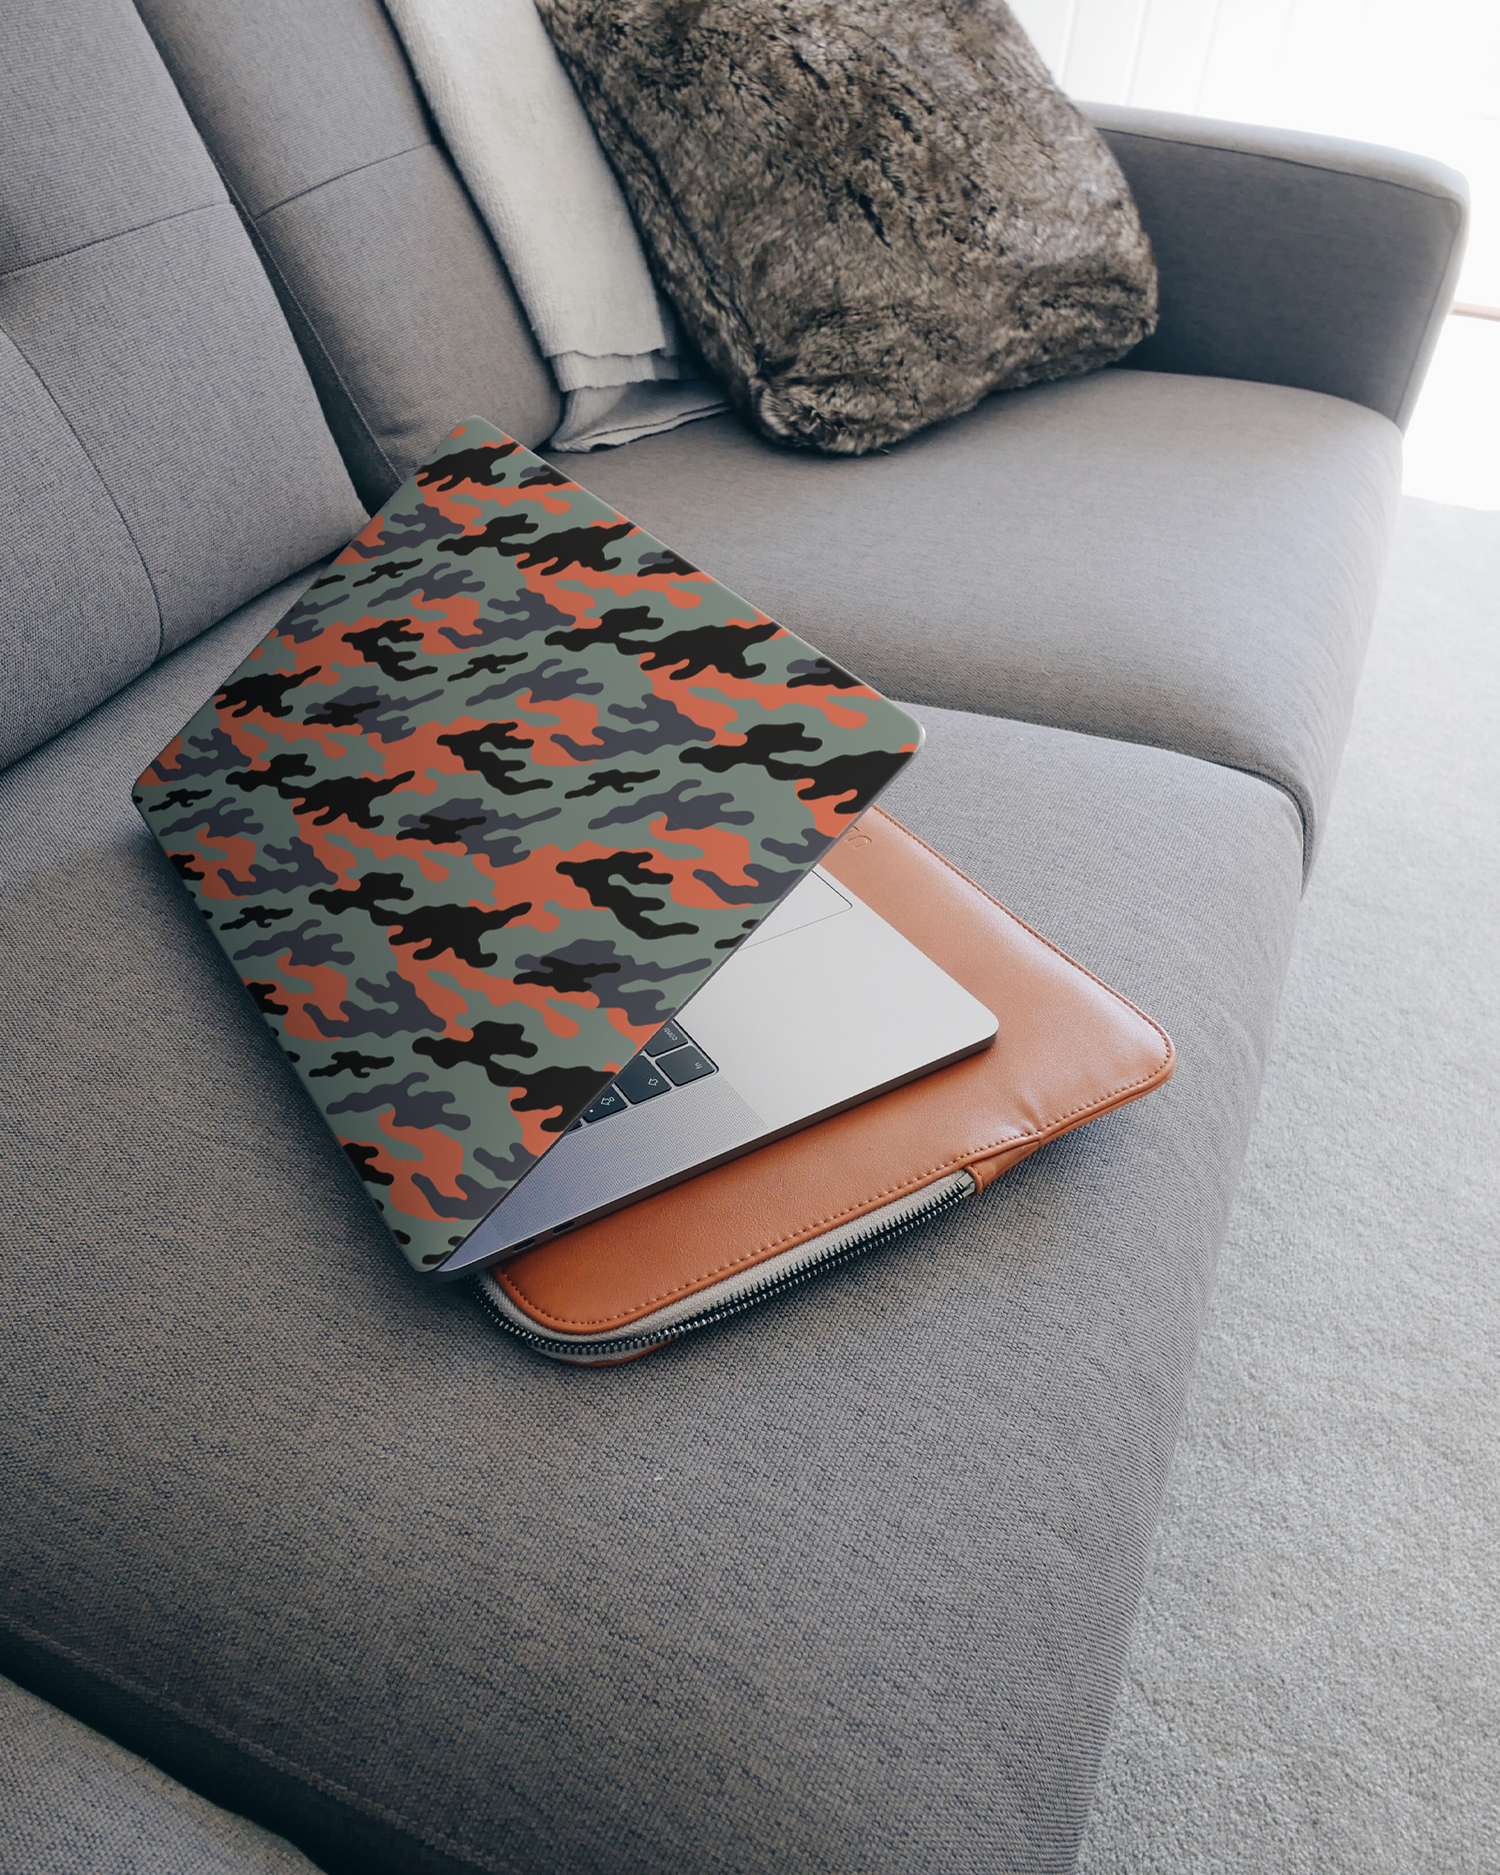 Camo Sunset Laptop Skin for 15 inch Apple MacBooks on a couch